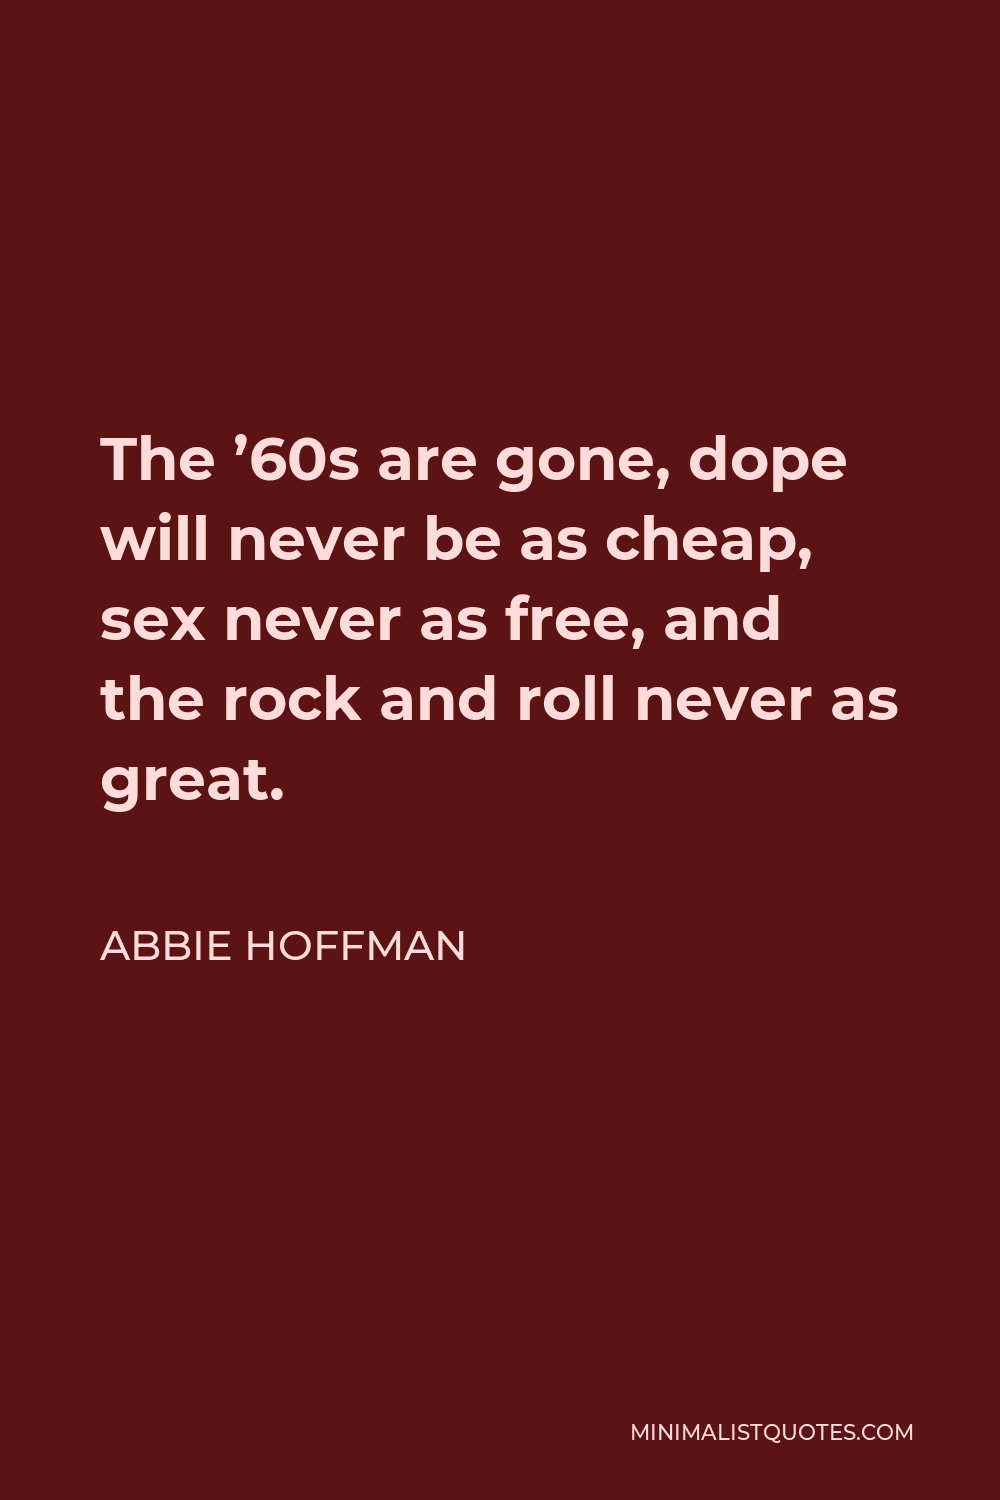 Abbie Hoffman Quote - The ’60s are gone, dope will never be as cheap, sex never as free, and the rock and roll never as great.